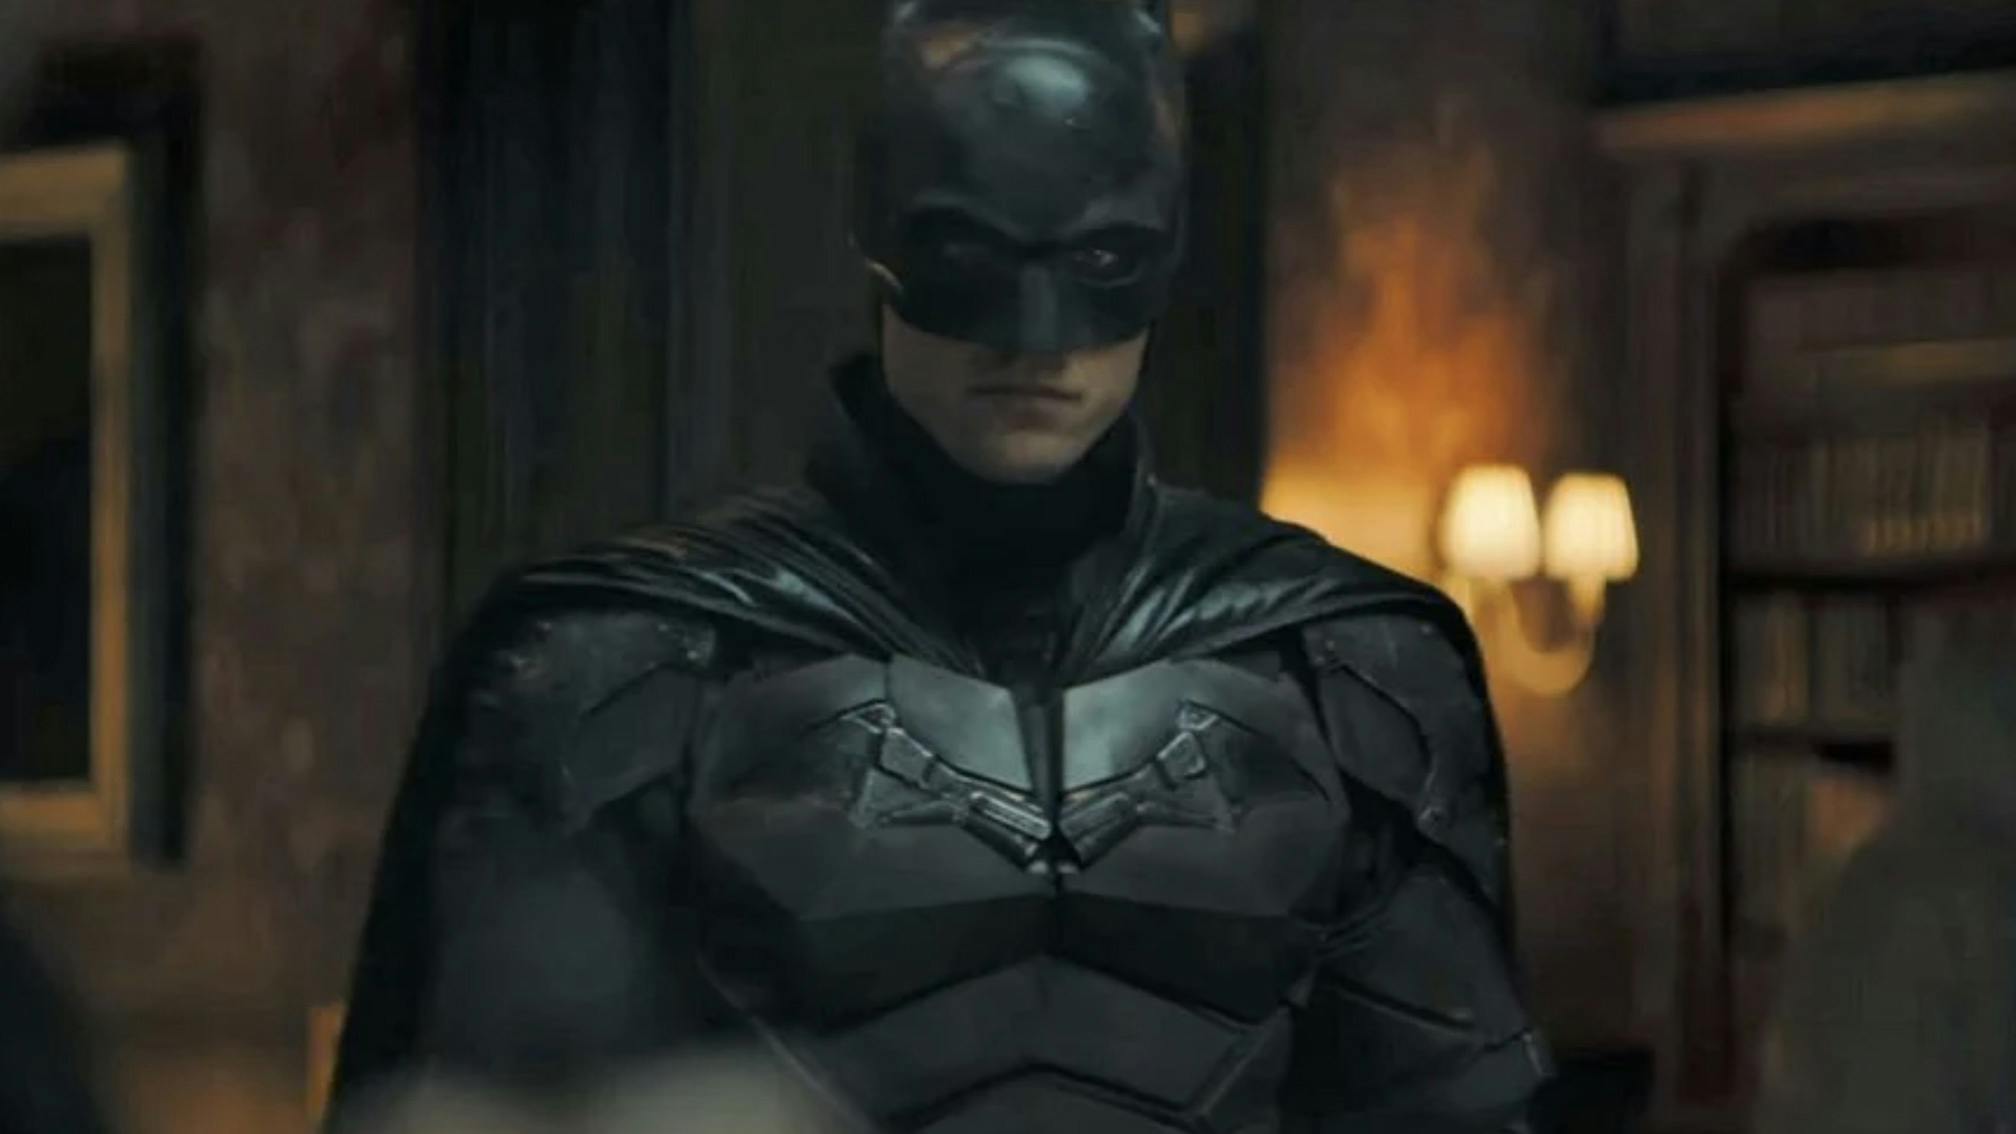 Filming For The Batman Paused As Robert Pattinson Reportedly Tests Positive For Coronavirus